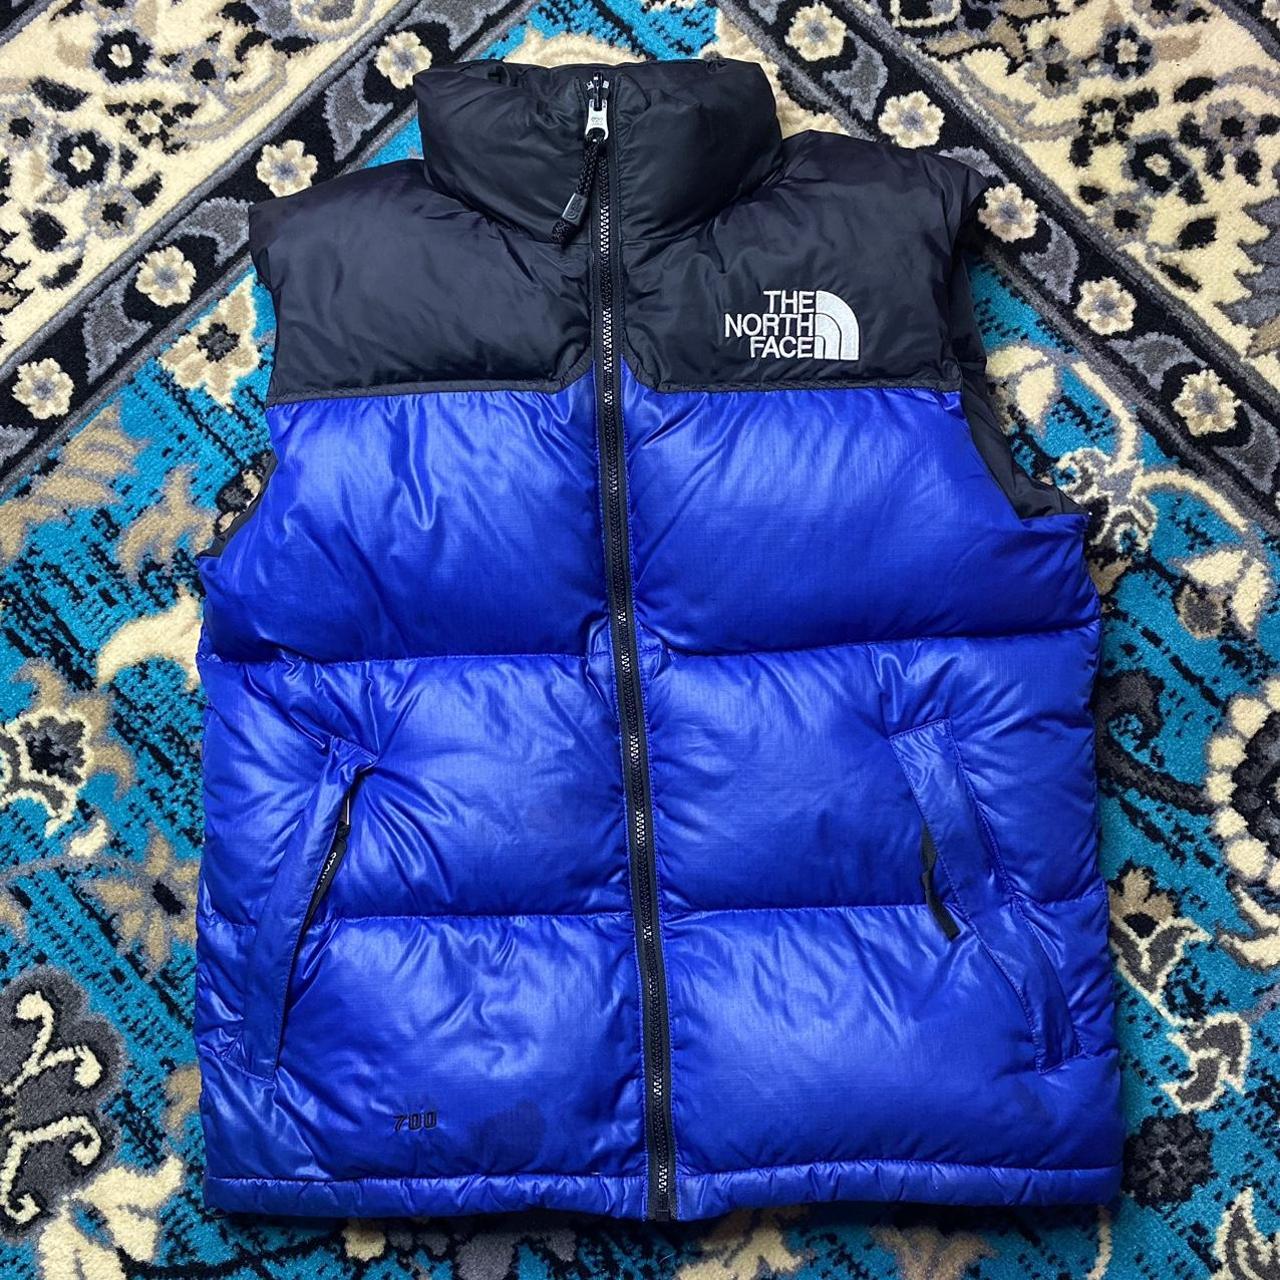 The North Face Men's Blue and Black Gilet